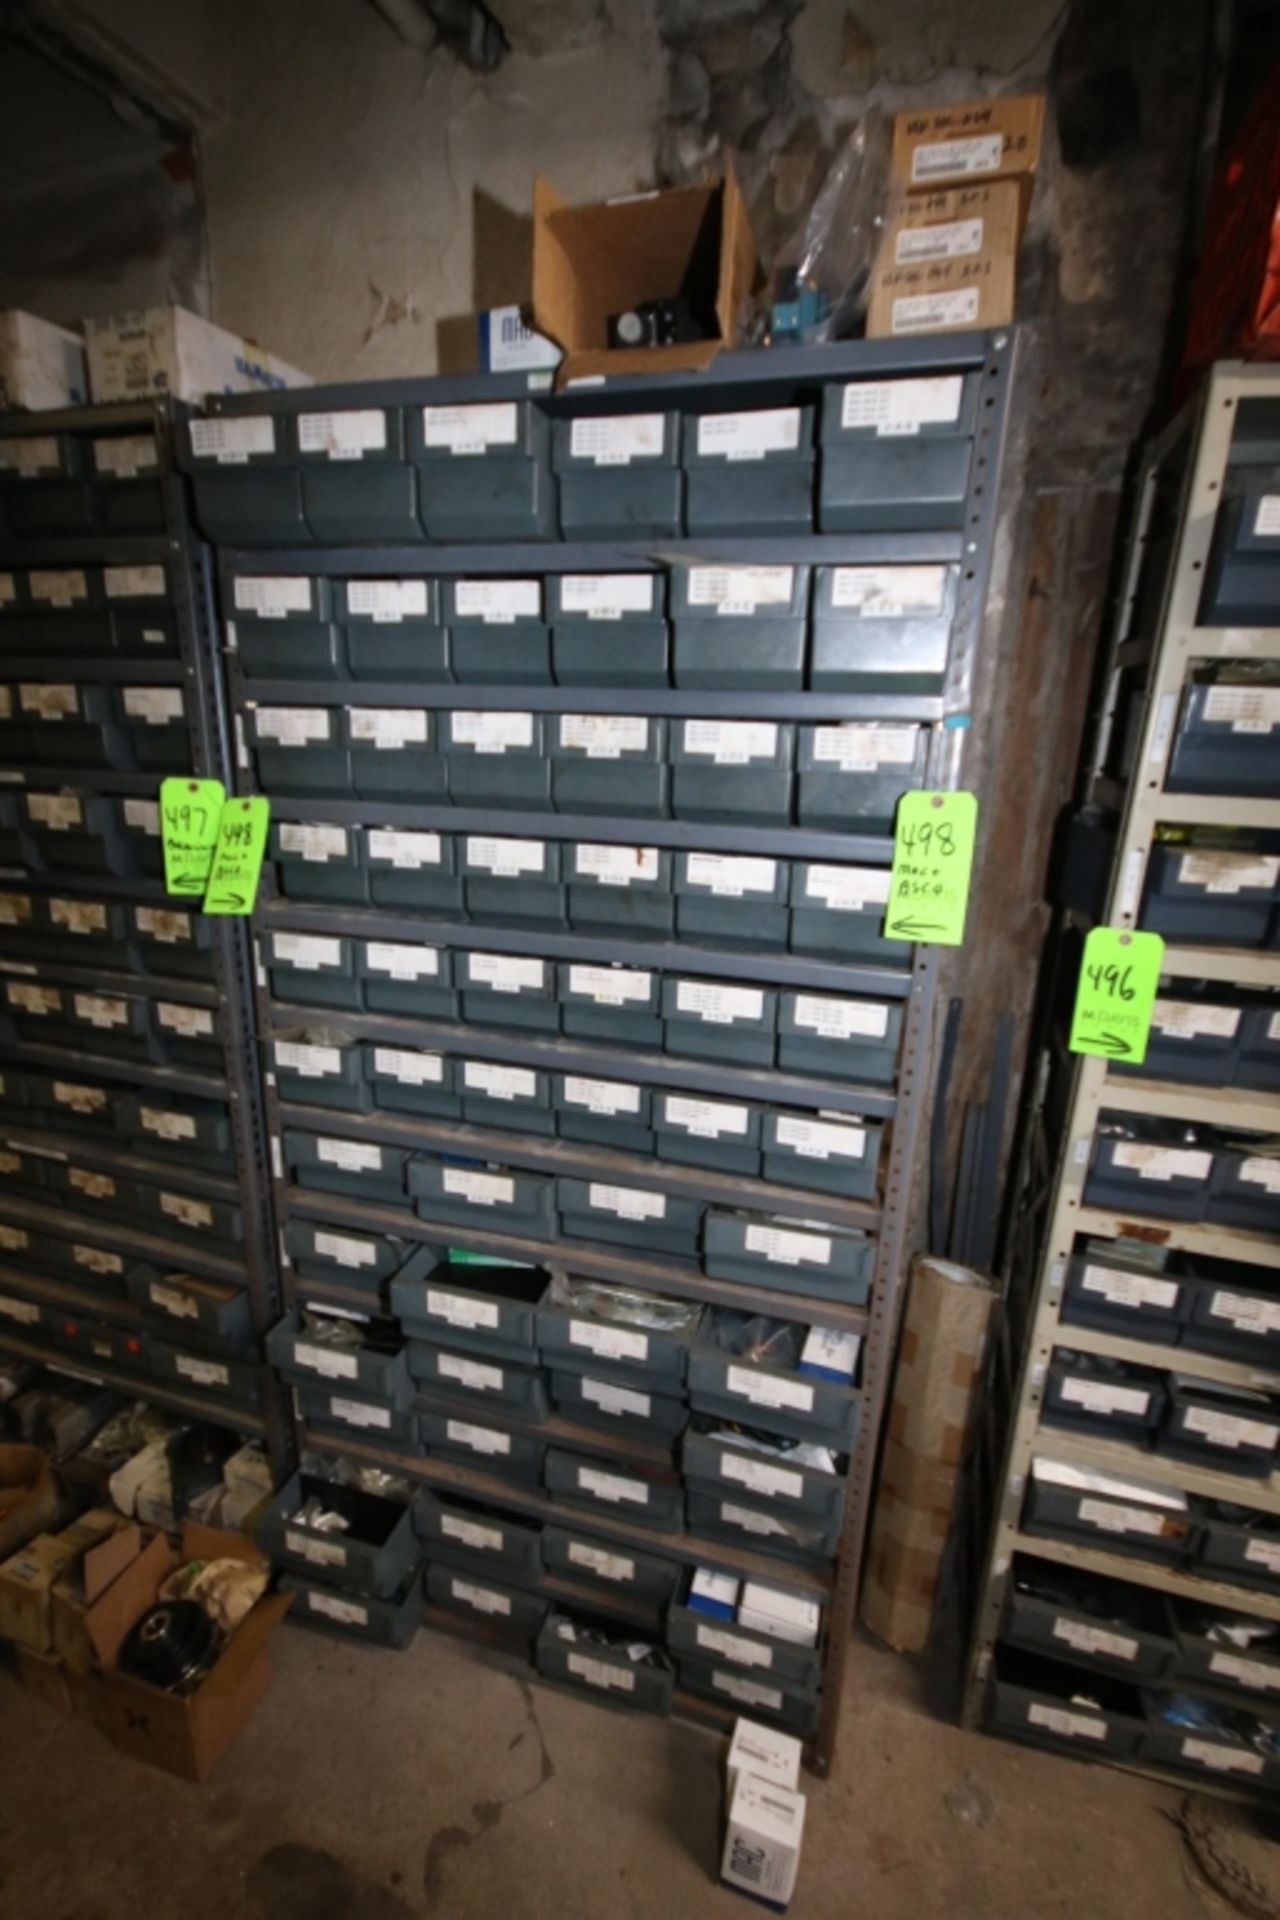 Shelf Unit with Over 60 Parts Bins Containing Air/Electric Solenoid Valves Mfg. by Asco, Mac and